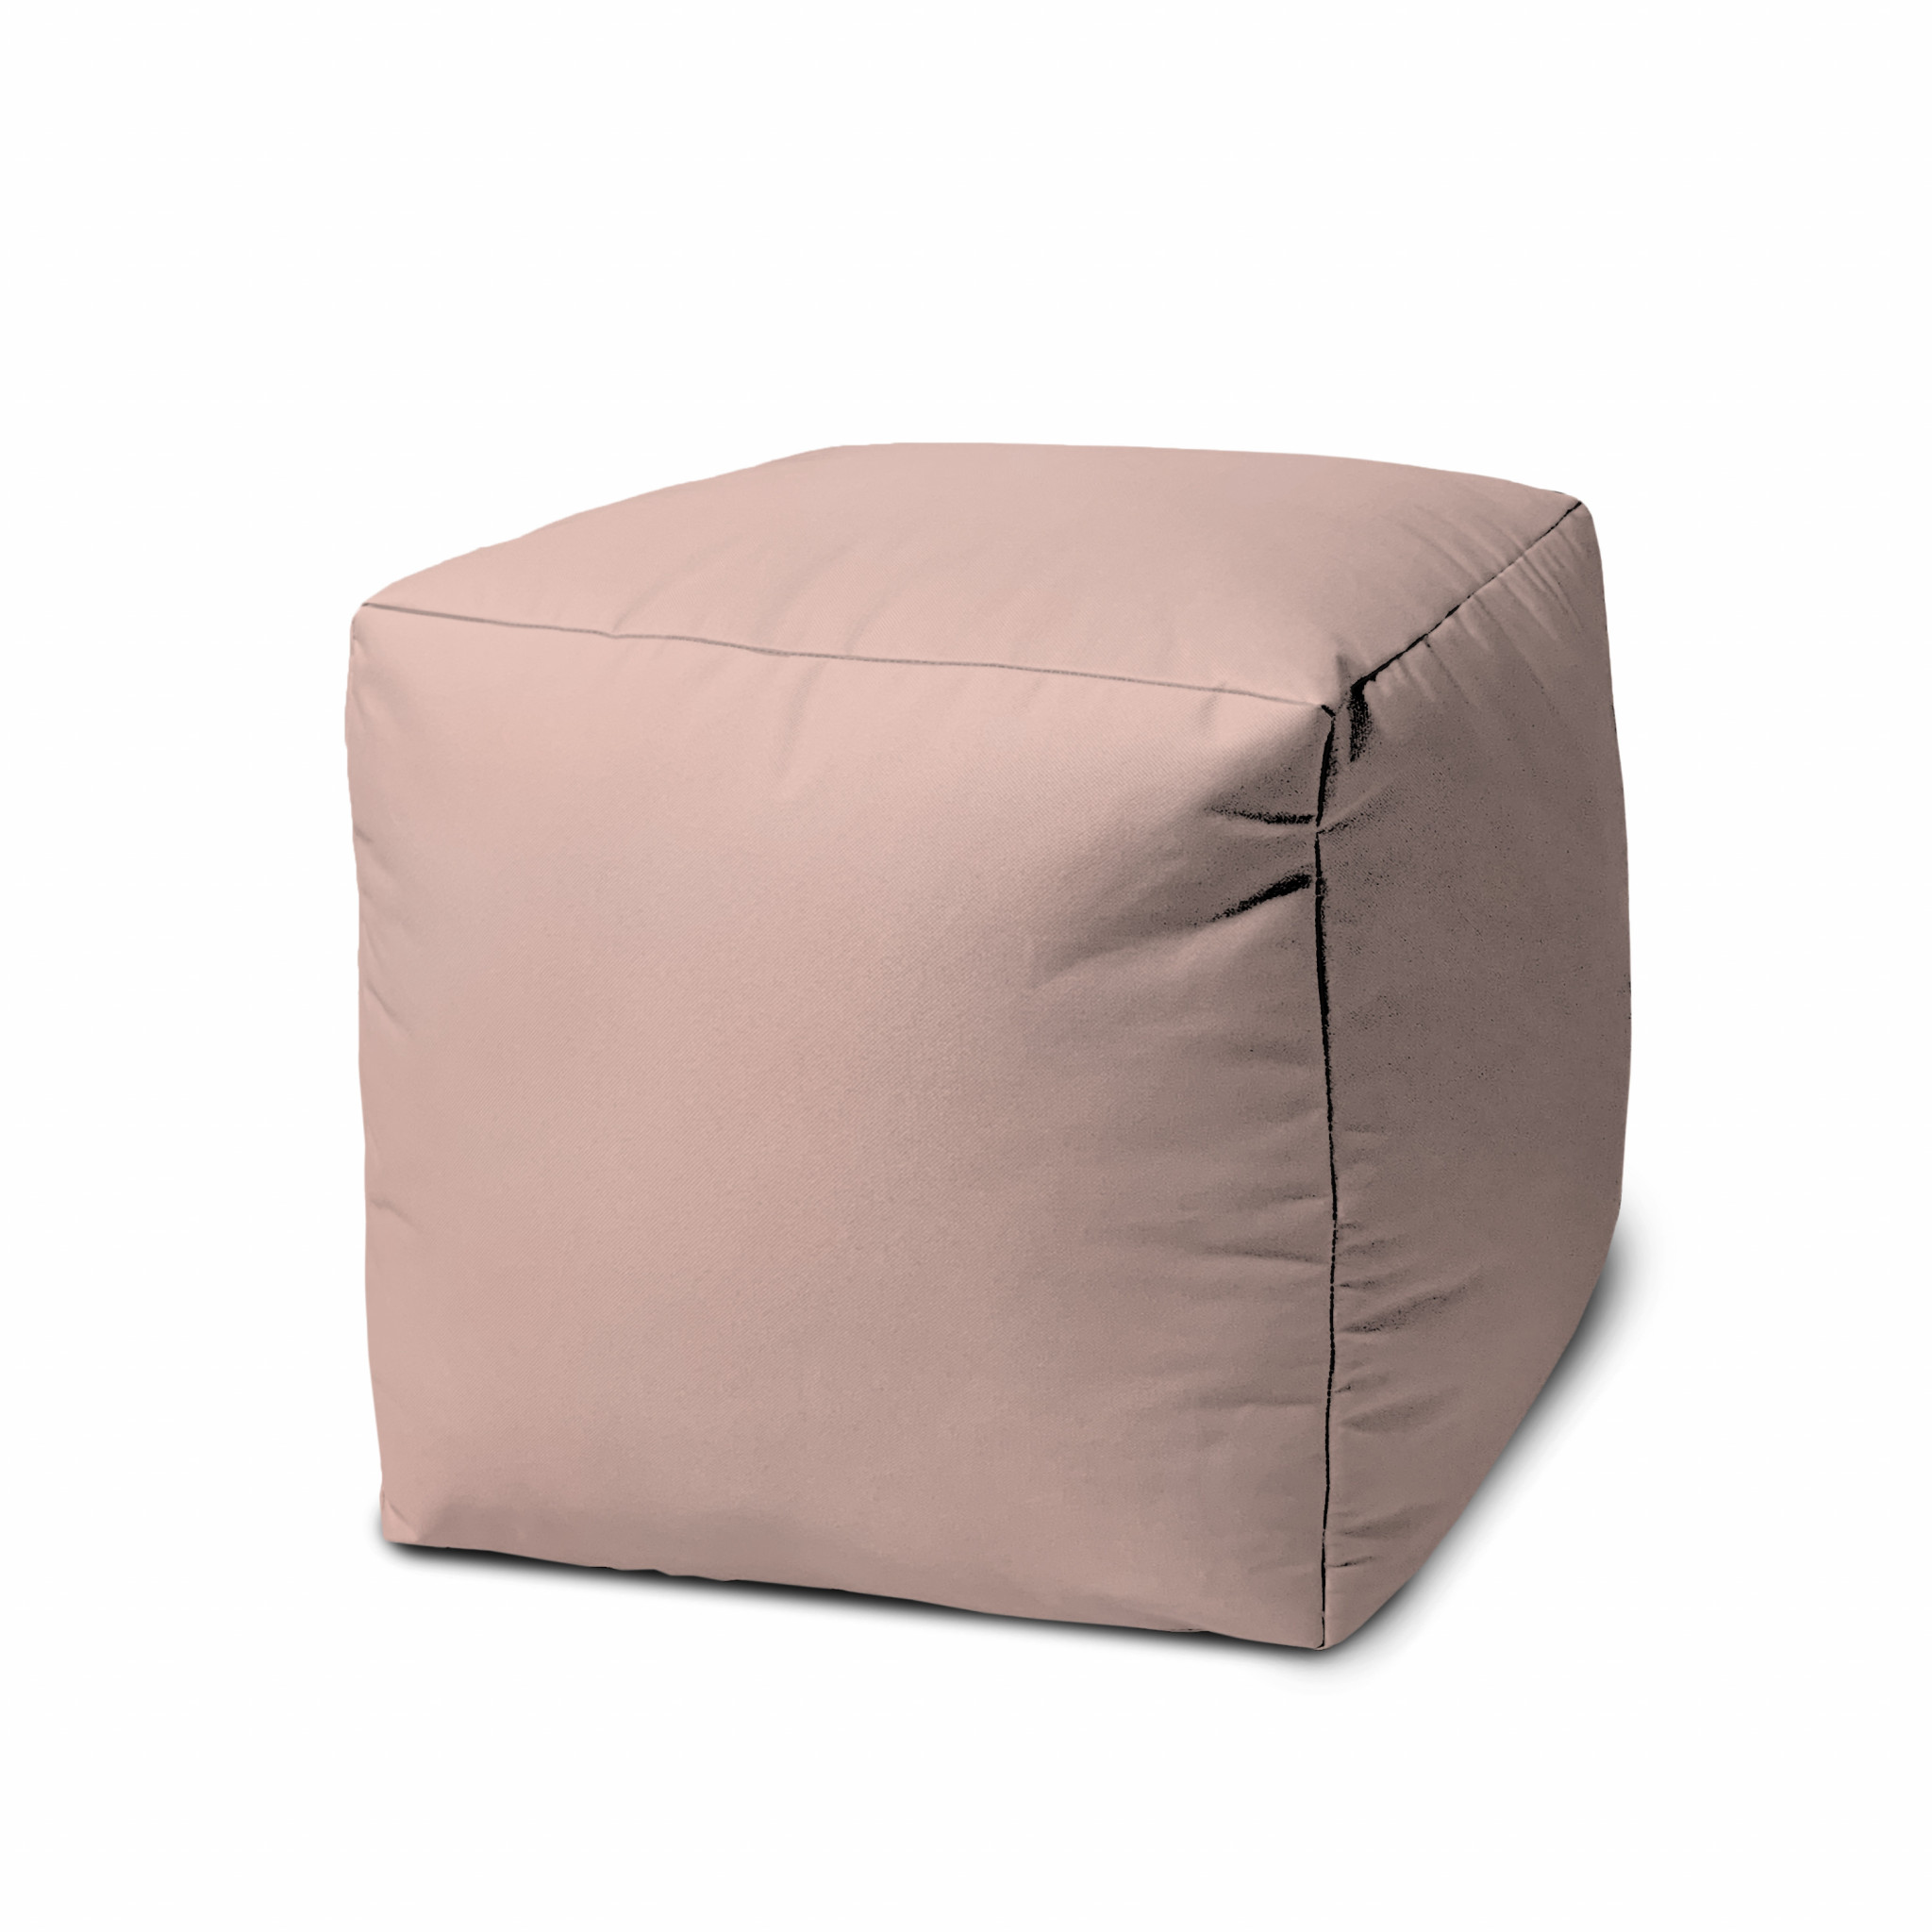 17" Cool Pale Pink Blush Solid Color Indoor Outdoor Pouf Ottoman-474191-1